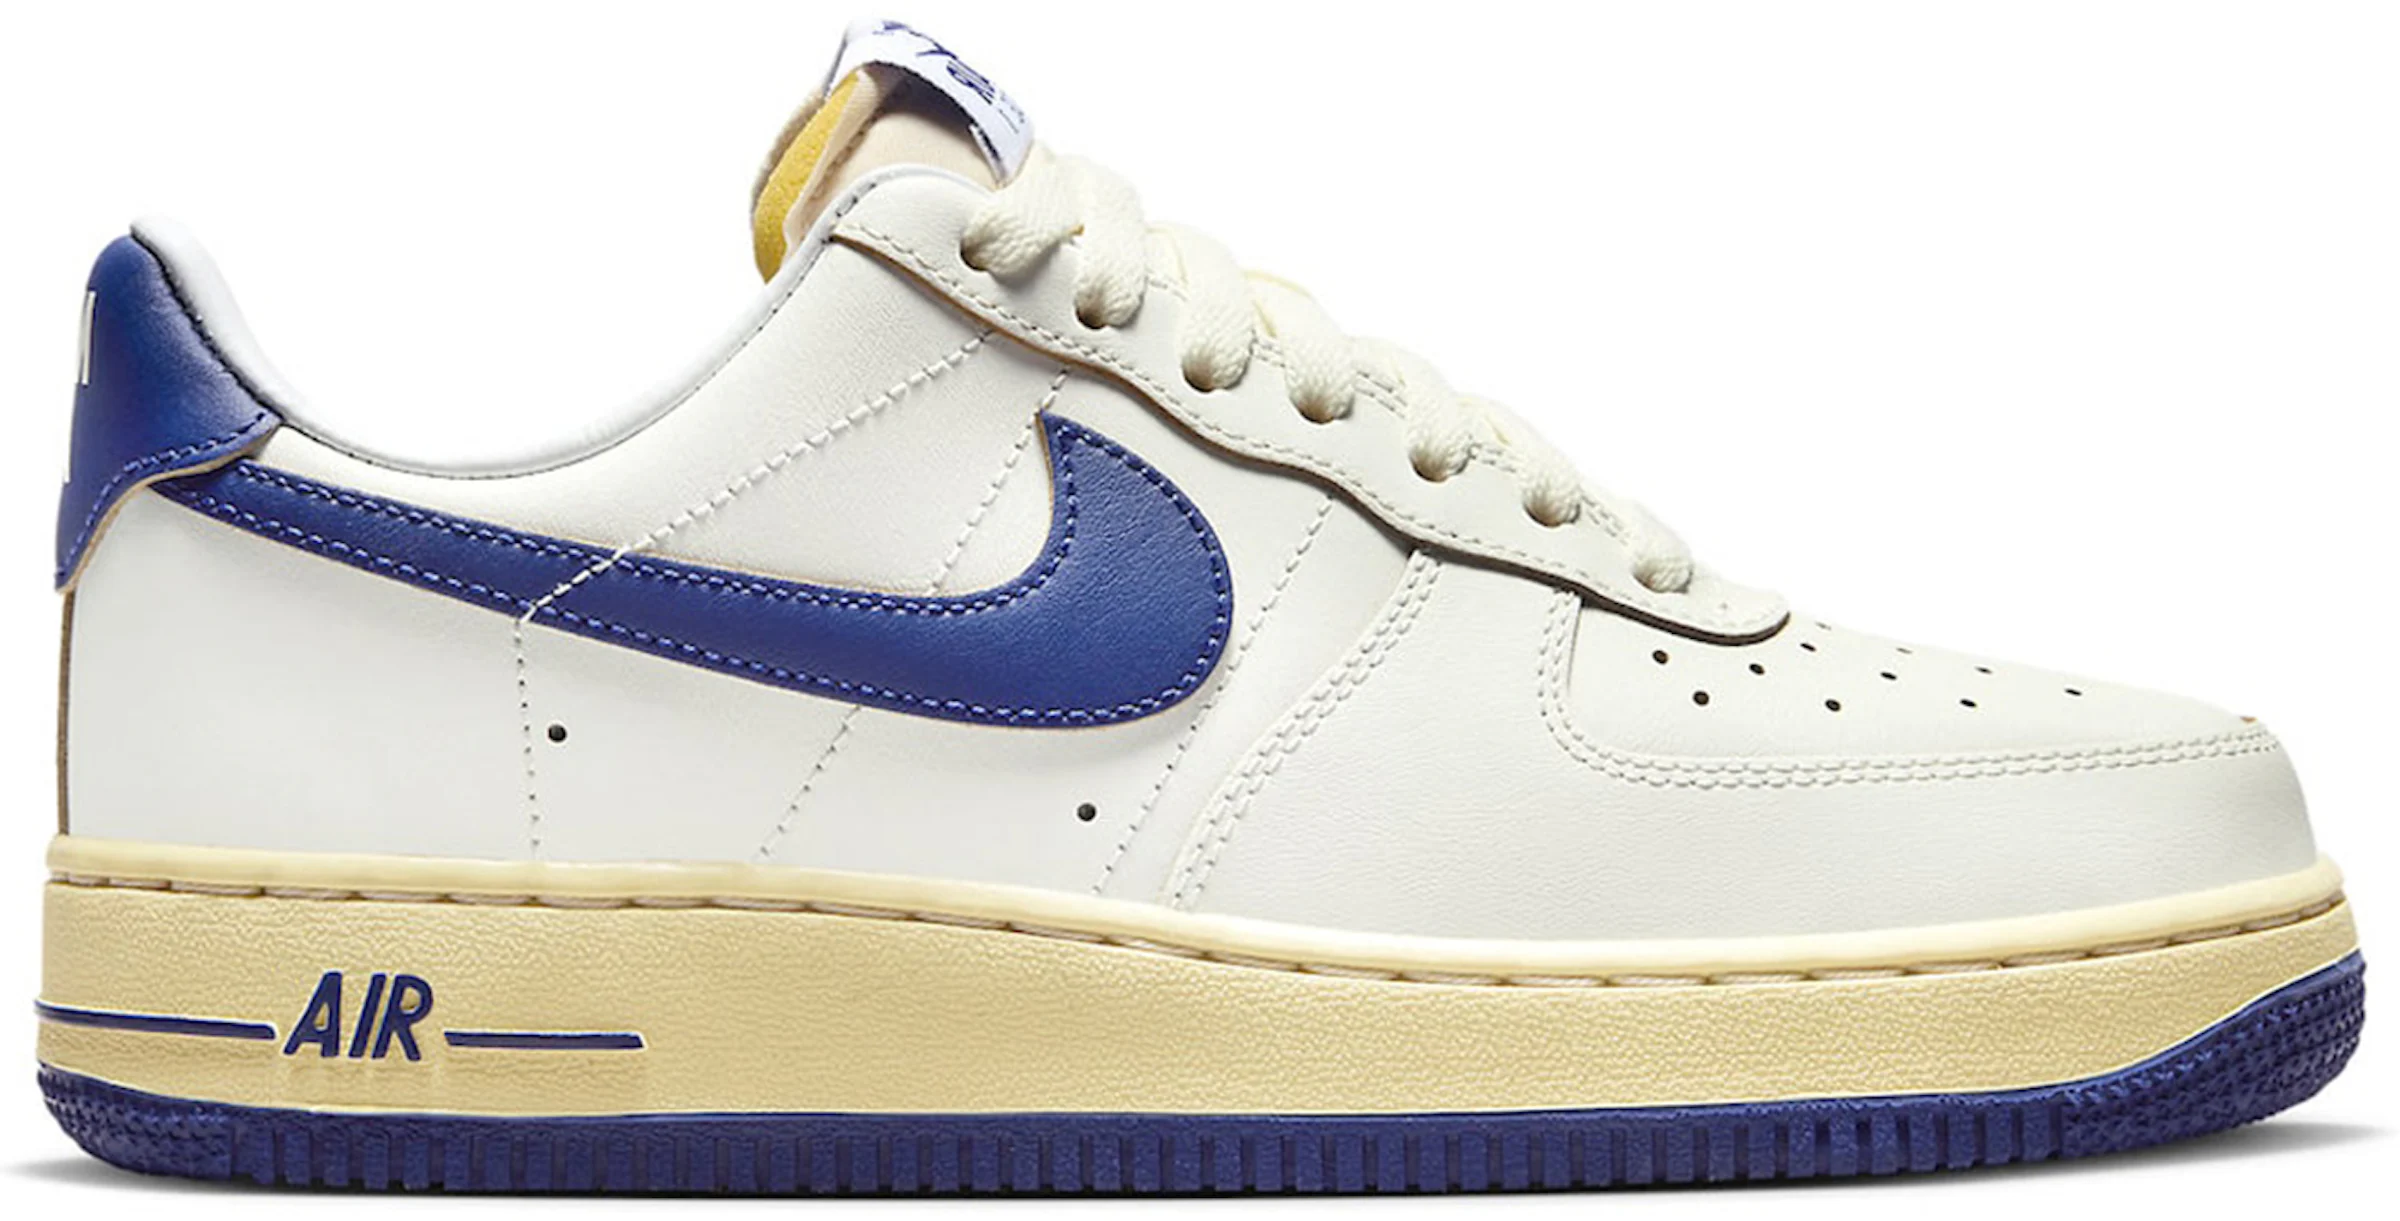 Nike Air Force 1 Low '07 Athletic Department Sail Deep Royal Blue (Women's)  - FQ8103-133 - US